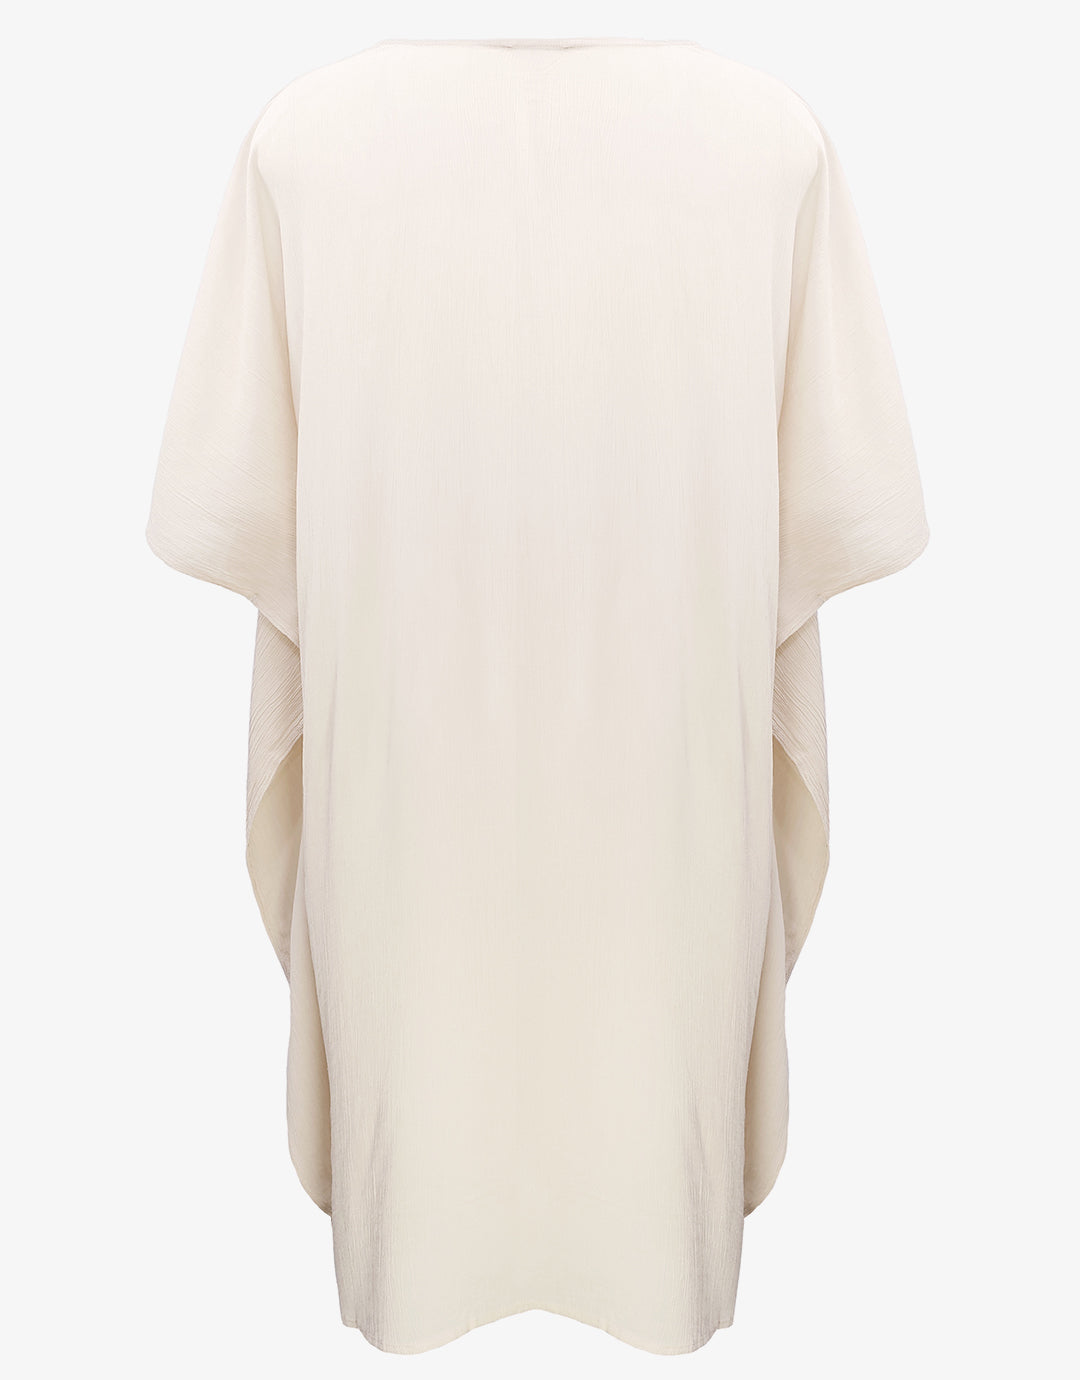 Embroidered Kaftan - Off White - Simply Beach UK